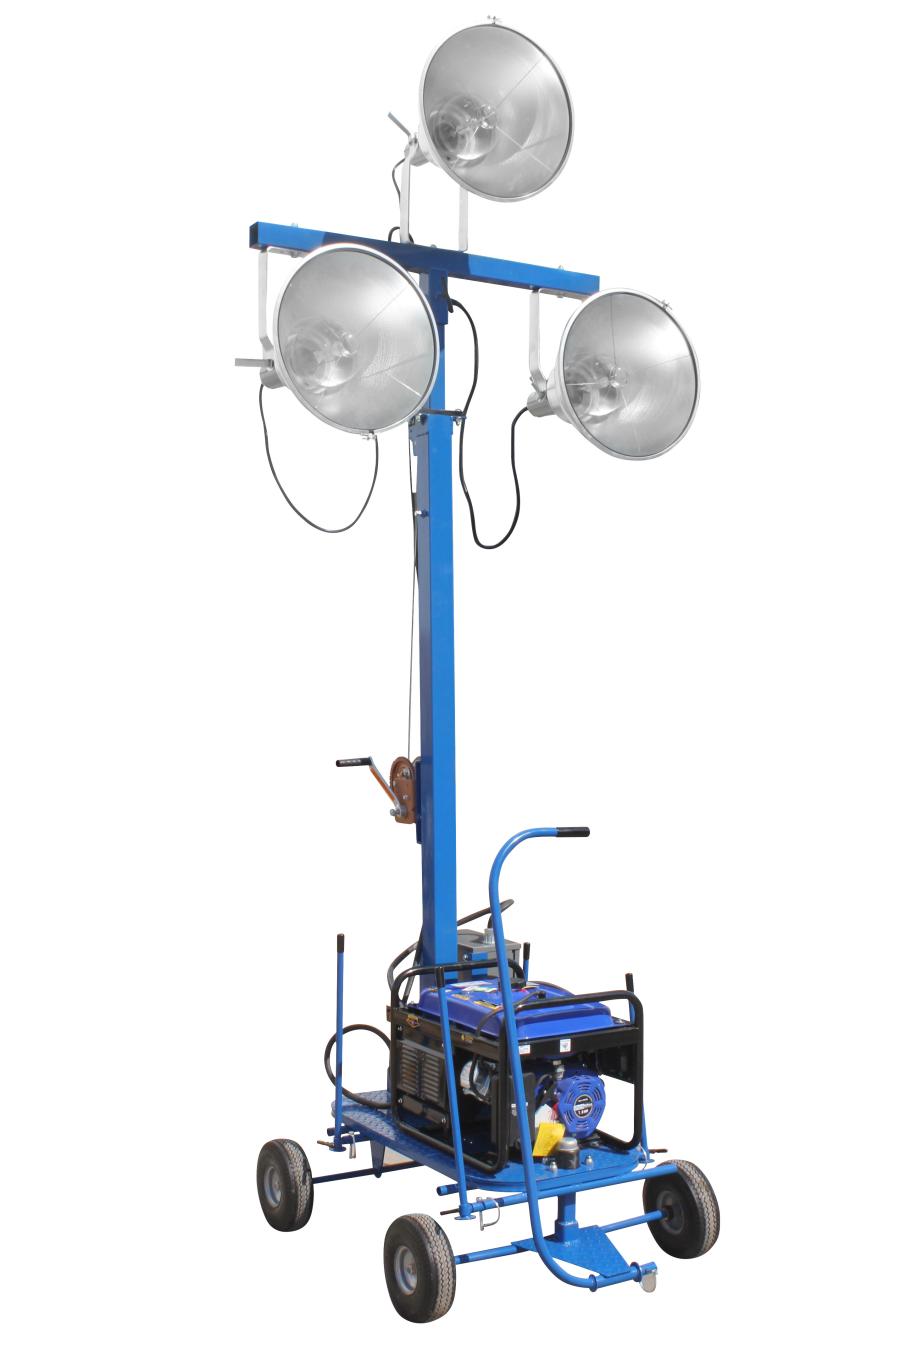 The WAL-ML-3XM-3G mini light tower from Larson Electronics is practical for operators who need a fully portable yet easy to operate light system capable of illuminating large areas.